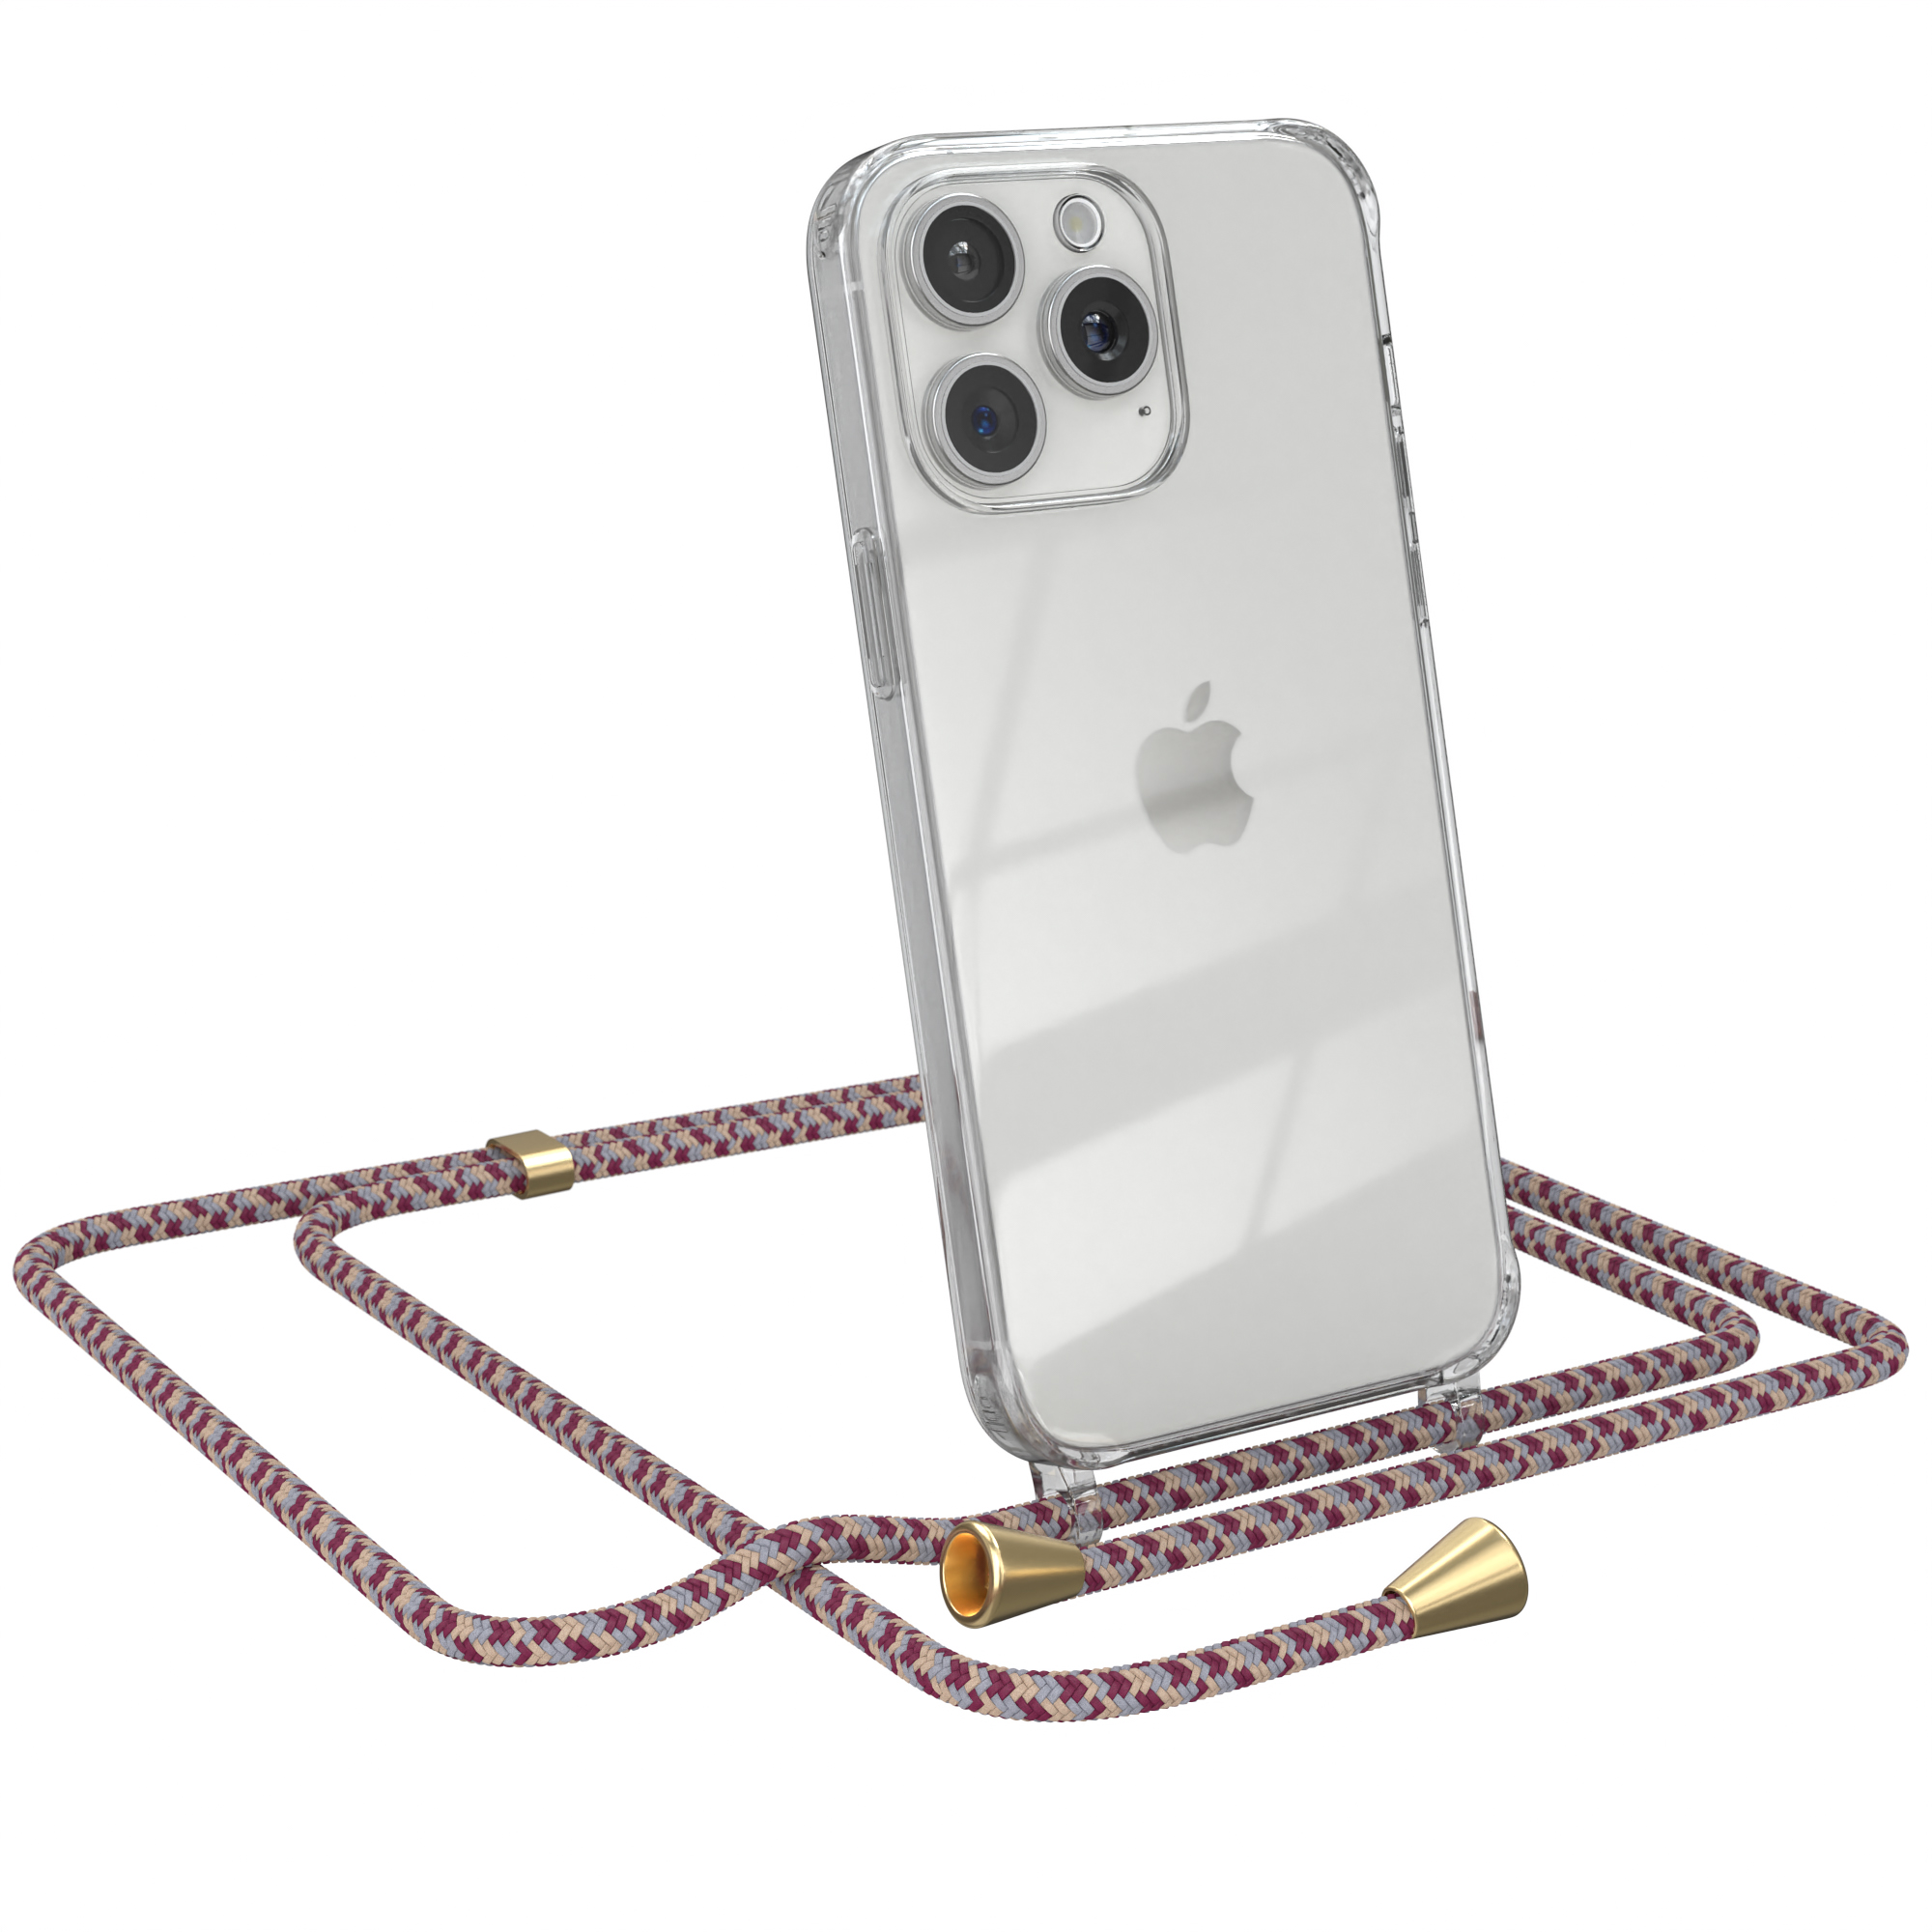 CASE Rot Max, Apple, Beige EAZY Pro iPhone Clear Clips Cover / mit Camouflage Umhängeband, 15 Gold Umhängetasche,